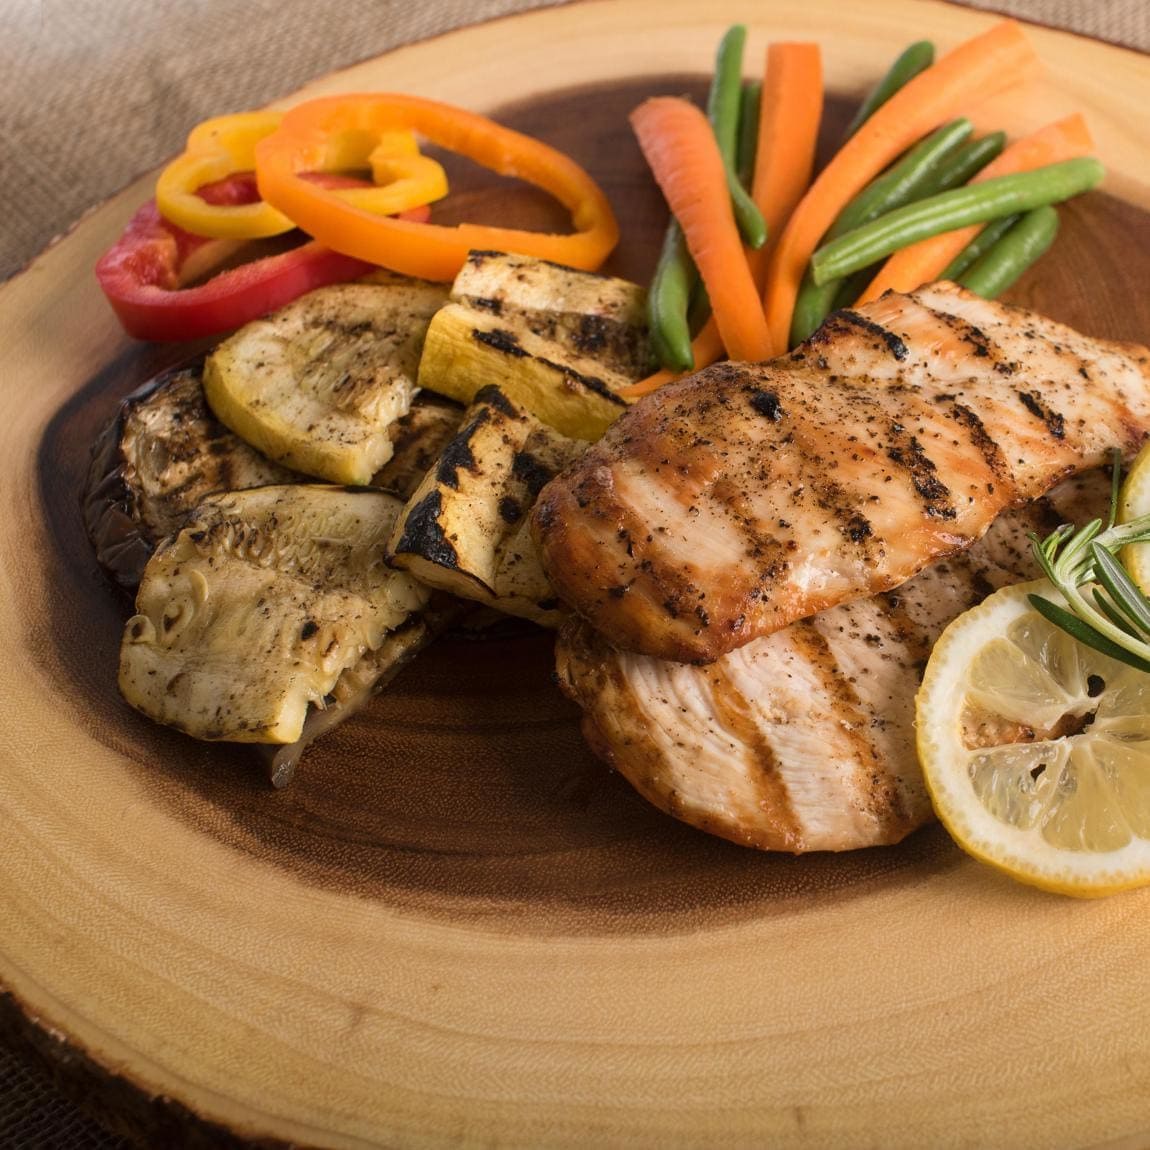 Plate of grilled chicken with vegetables